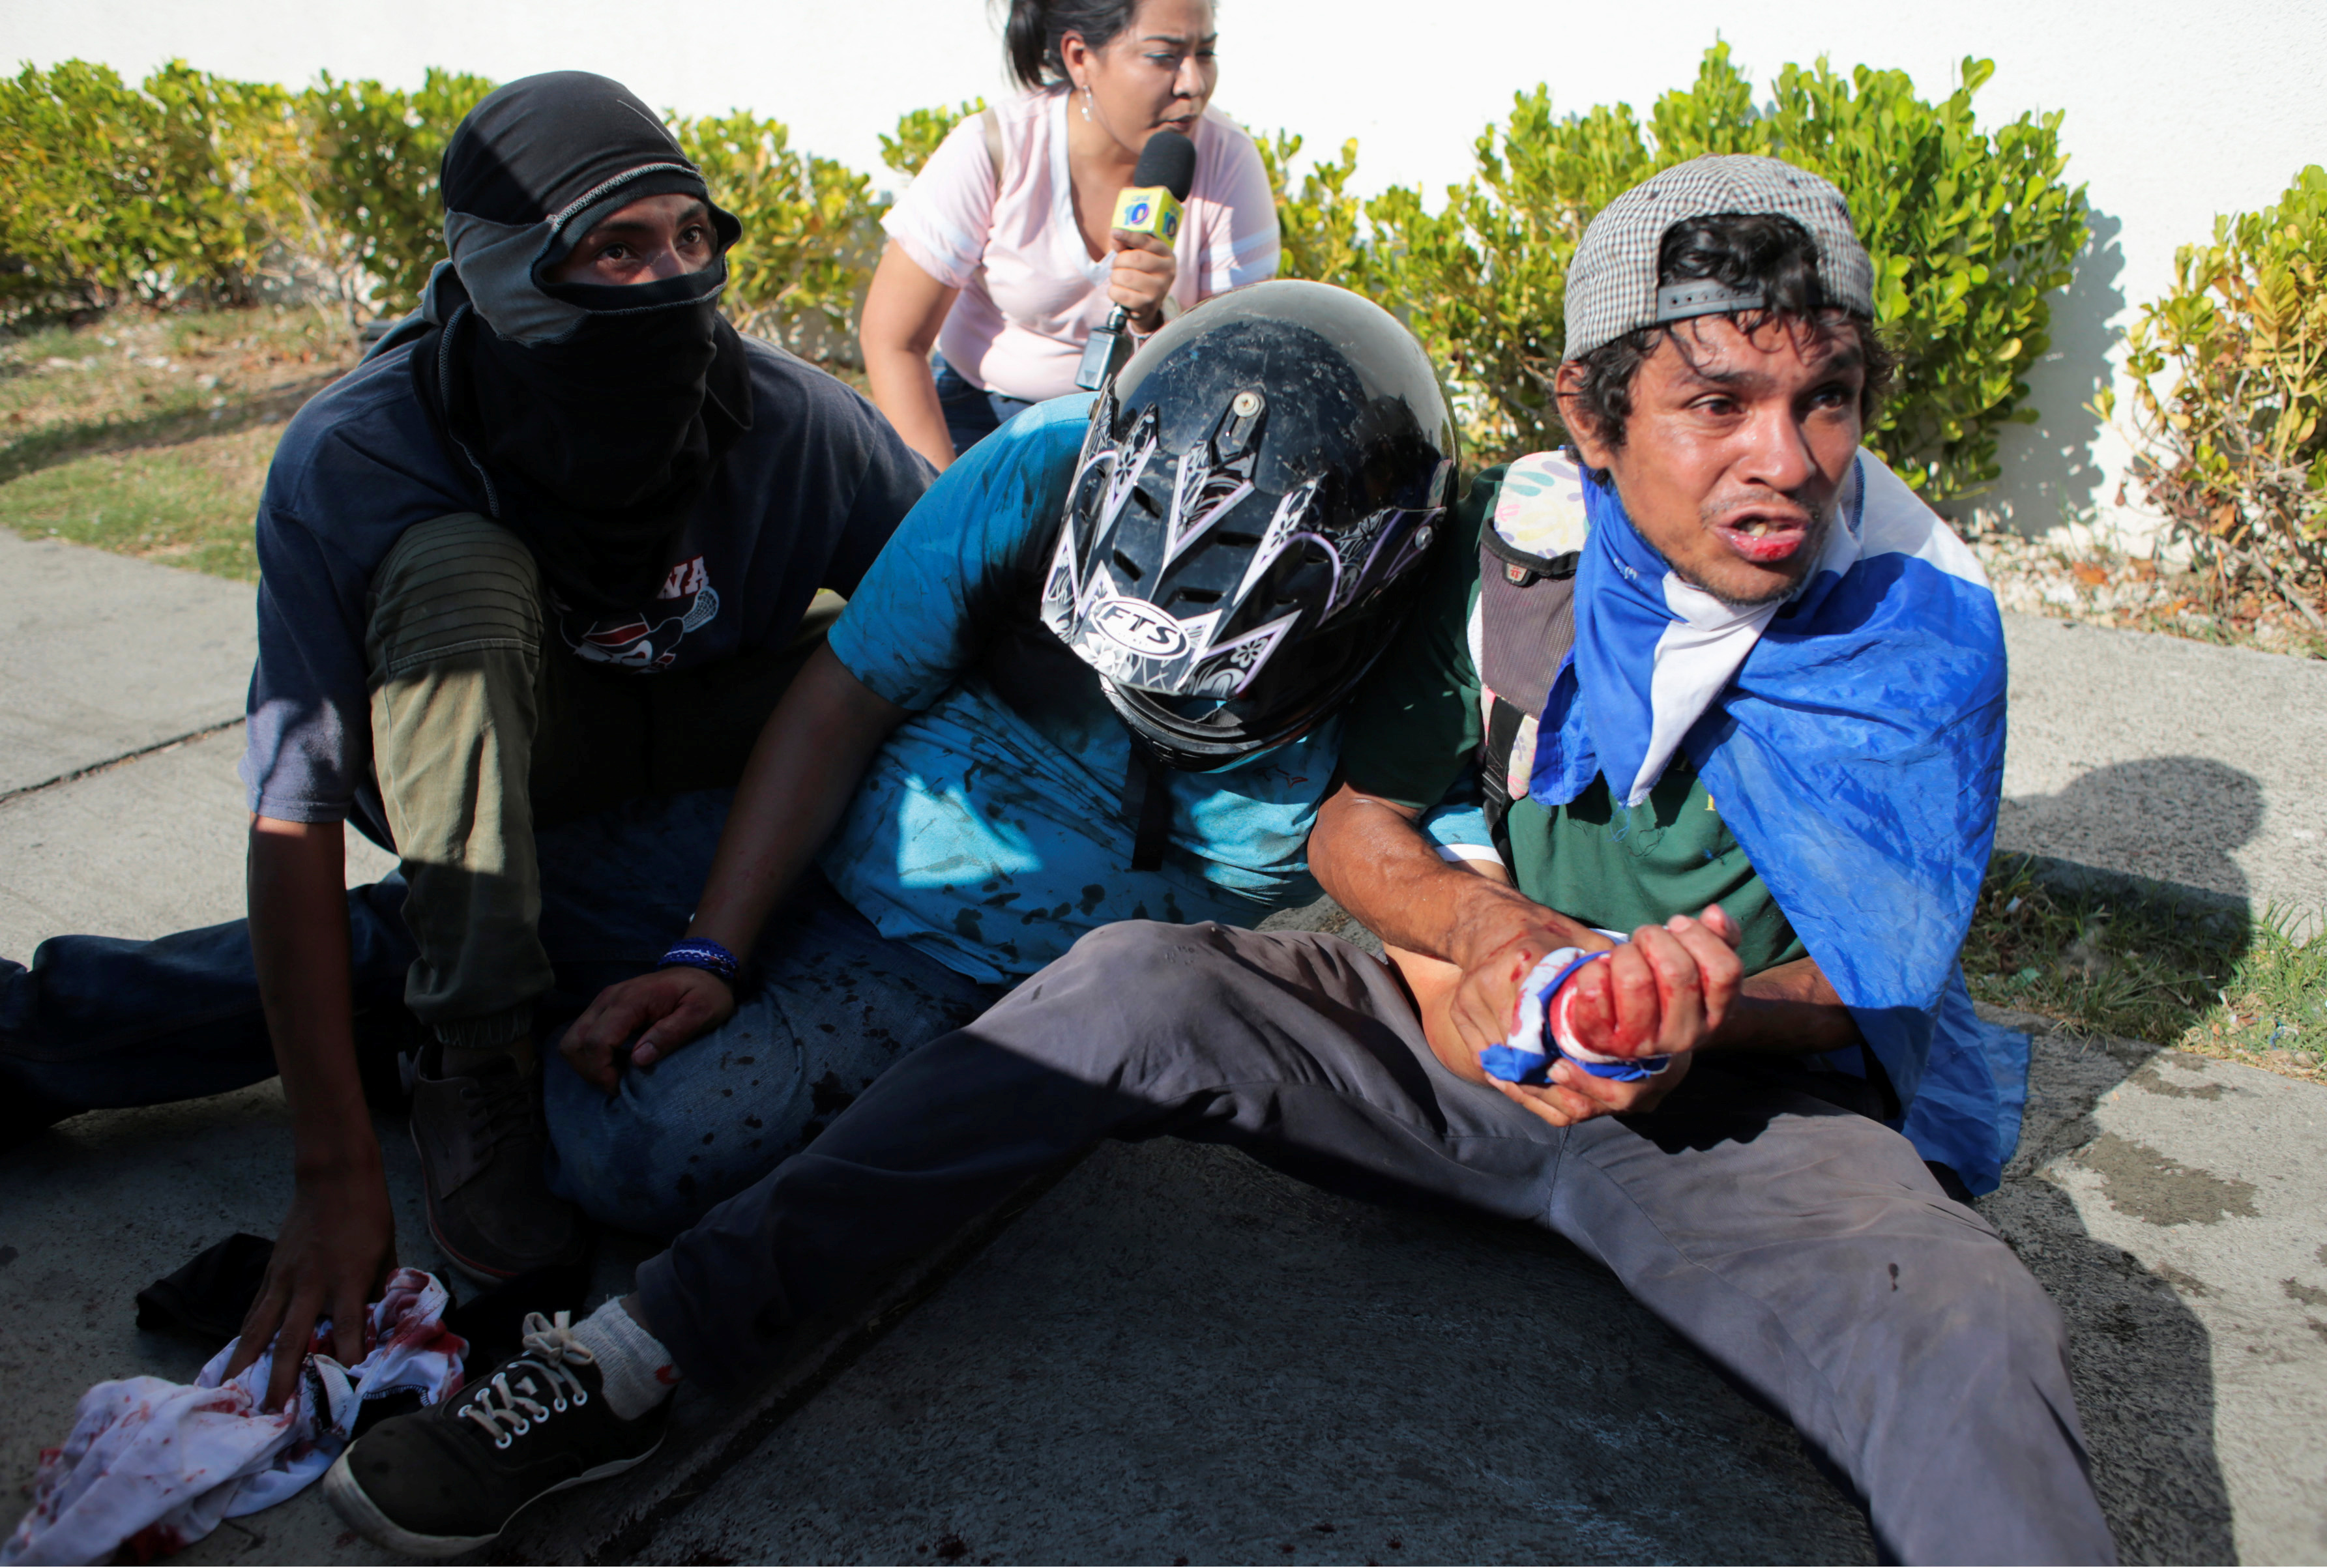 2019-03-30T230710Z_788448706_RC11A80A3060_RTRMADP_3_NICARAGUA-PROTESTS